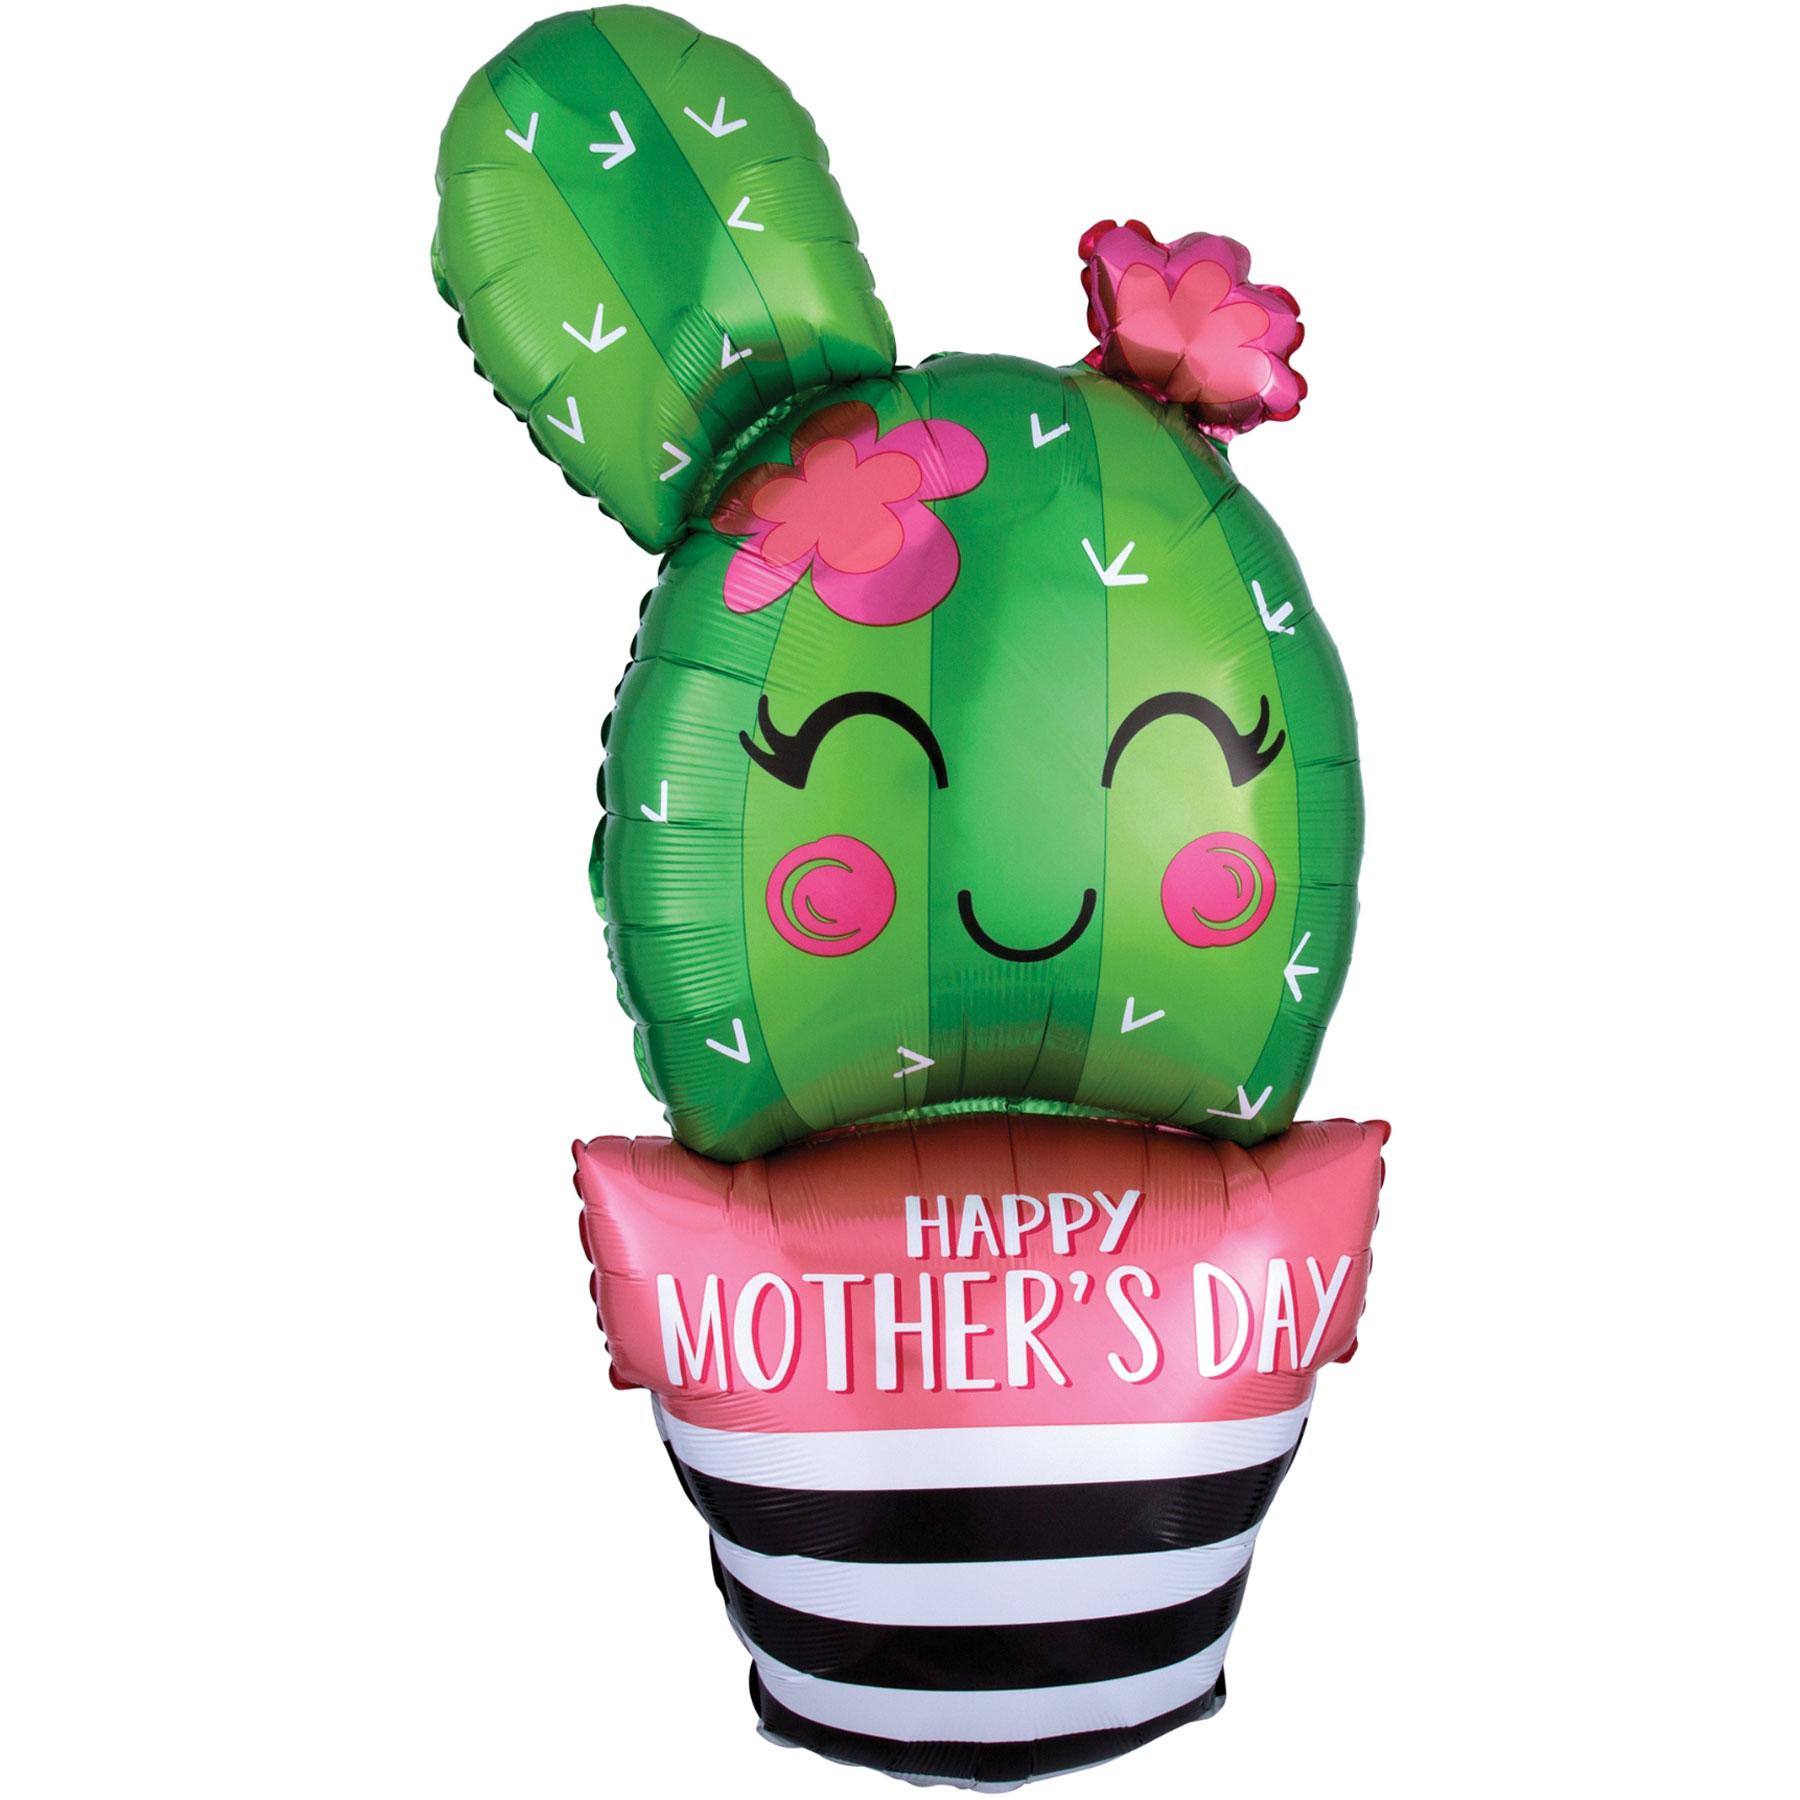 Happy Mother's Day Cactus SuperShape Balloon 45x88cm Balloons & Streamers - Party Centre - Party Centre